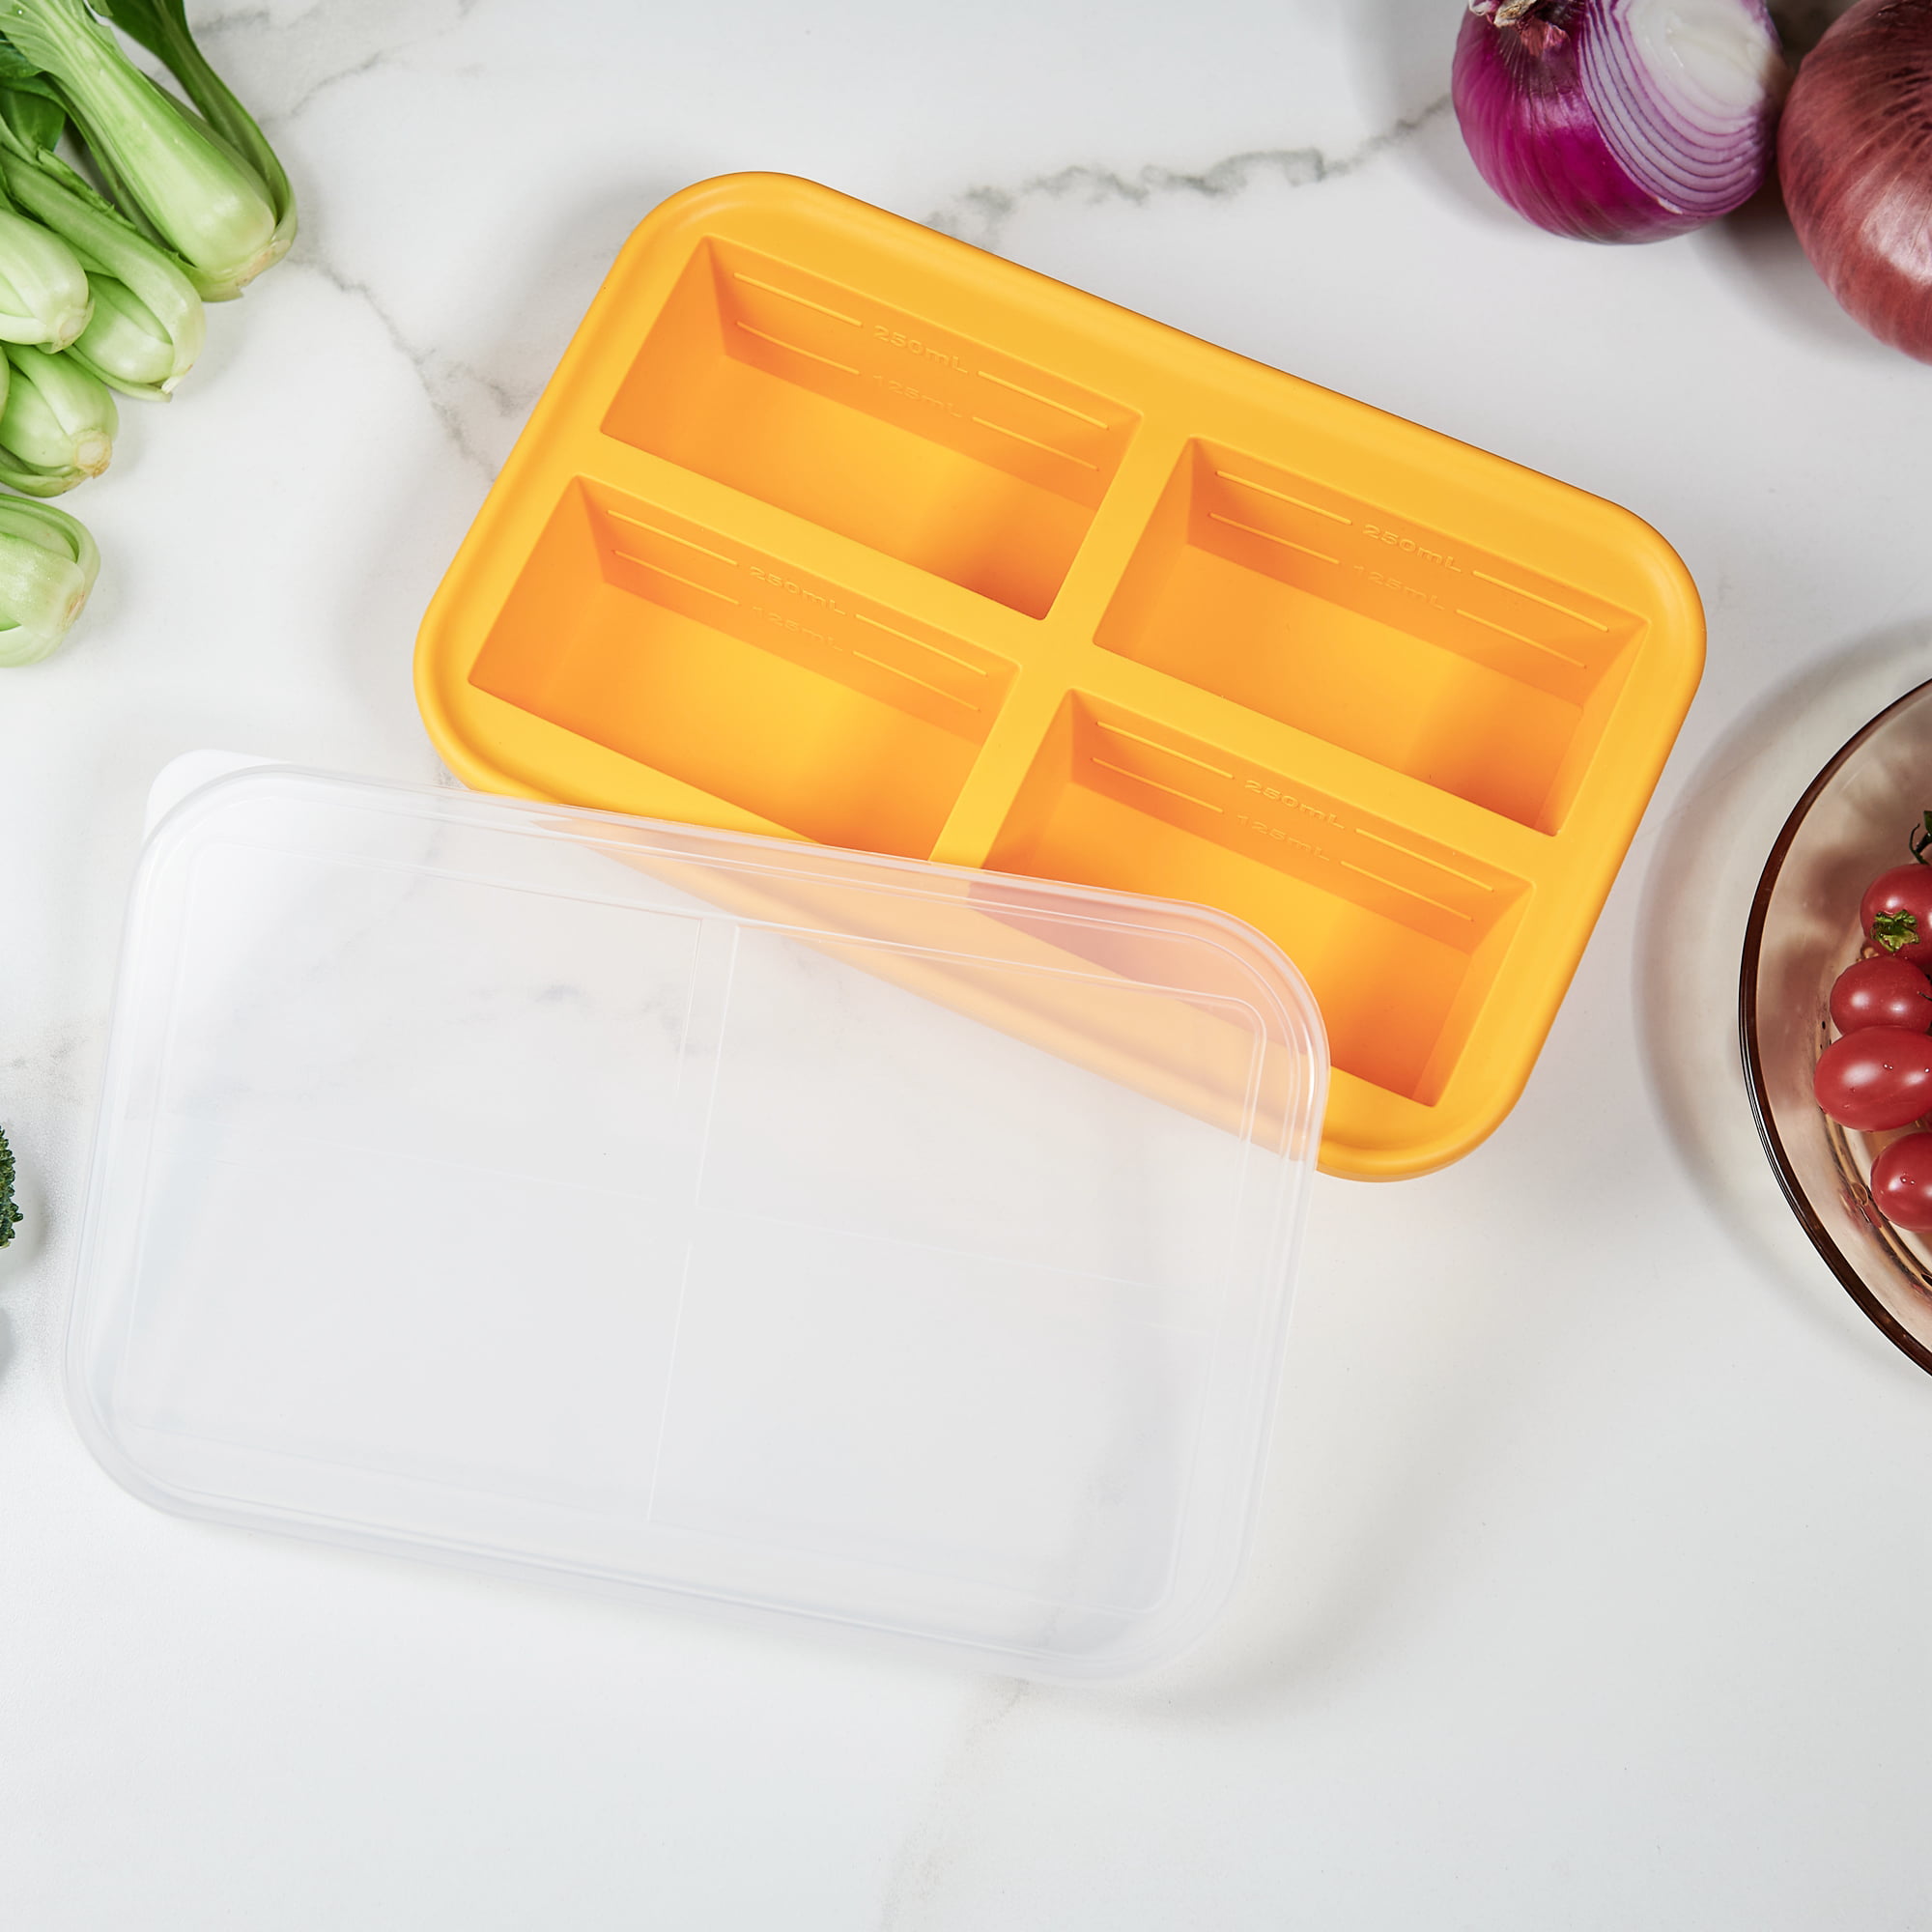 Silicone Freezer Tray with Lid - Food Storage Container, Makes 2 Perfect  Portions 2 Cup Cube Portion, Ice Cube Tray for Soup Sauce Meal Prep, Molds